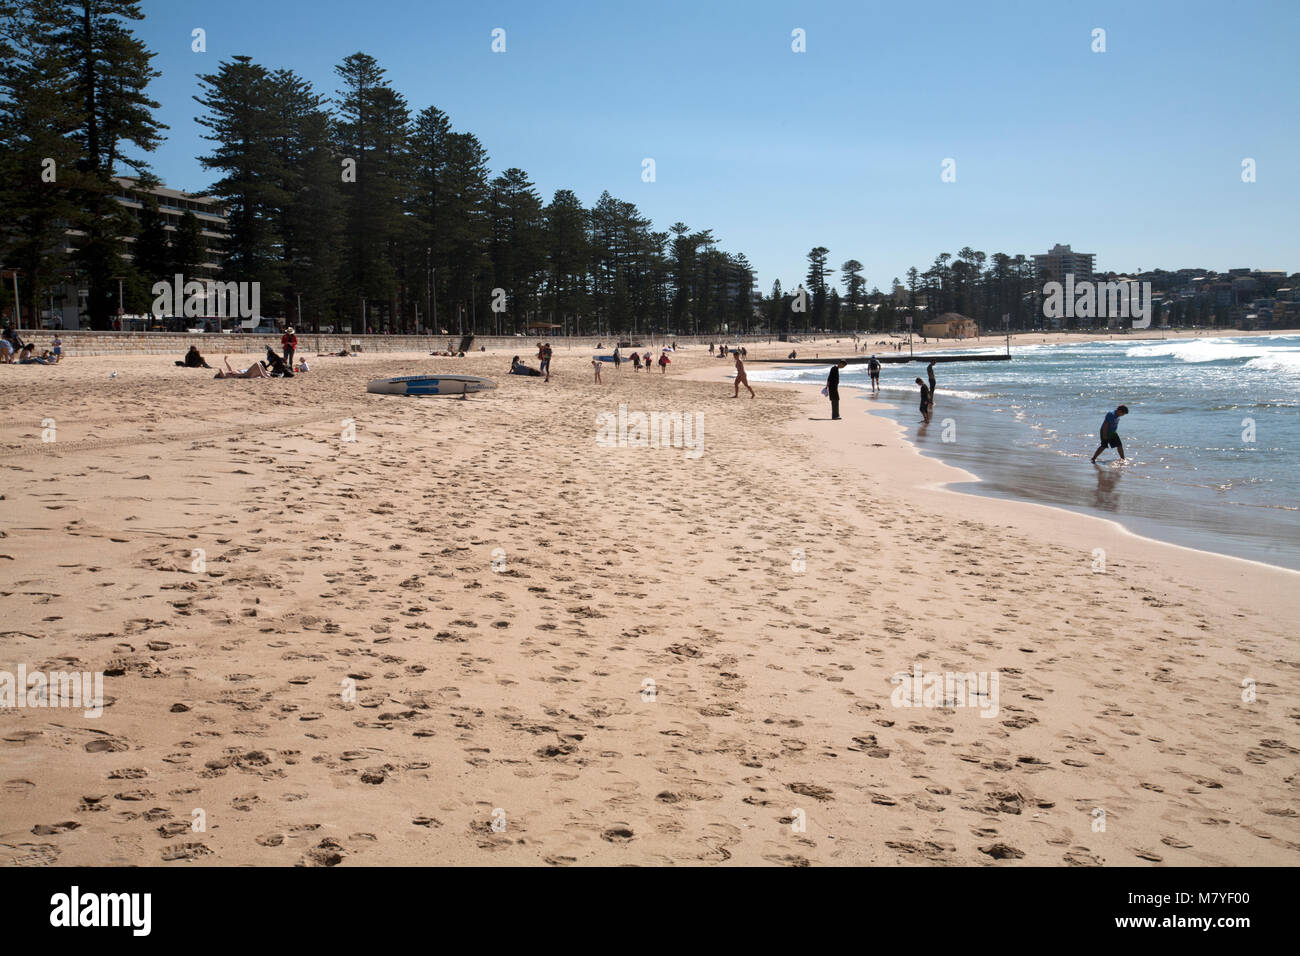 pacific ocean manly beach manly sydney new south wales australia Stock Photo